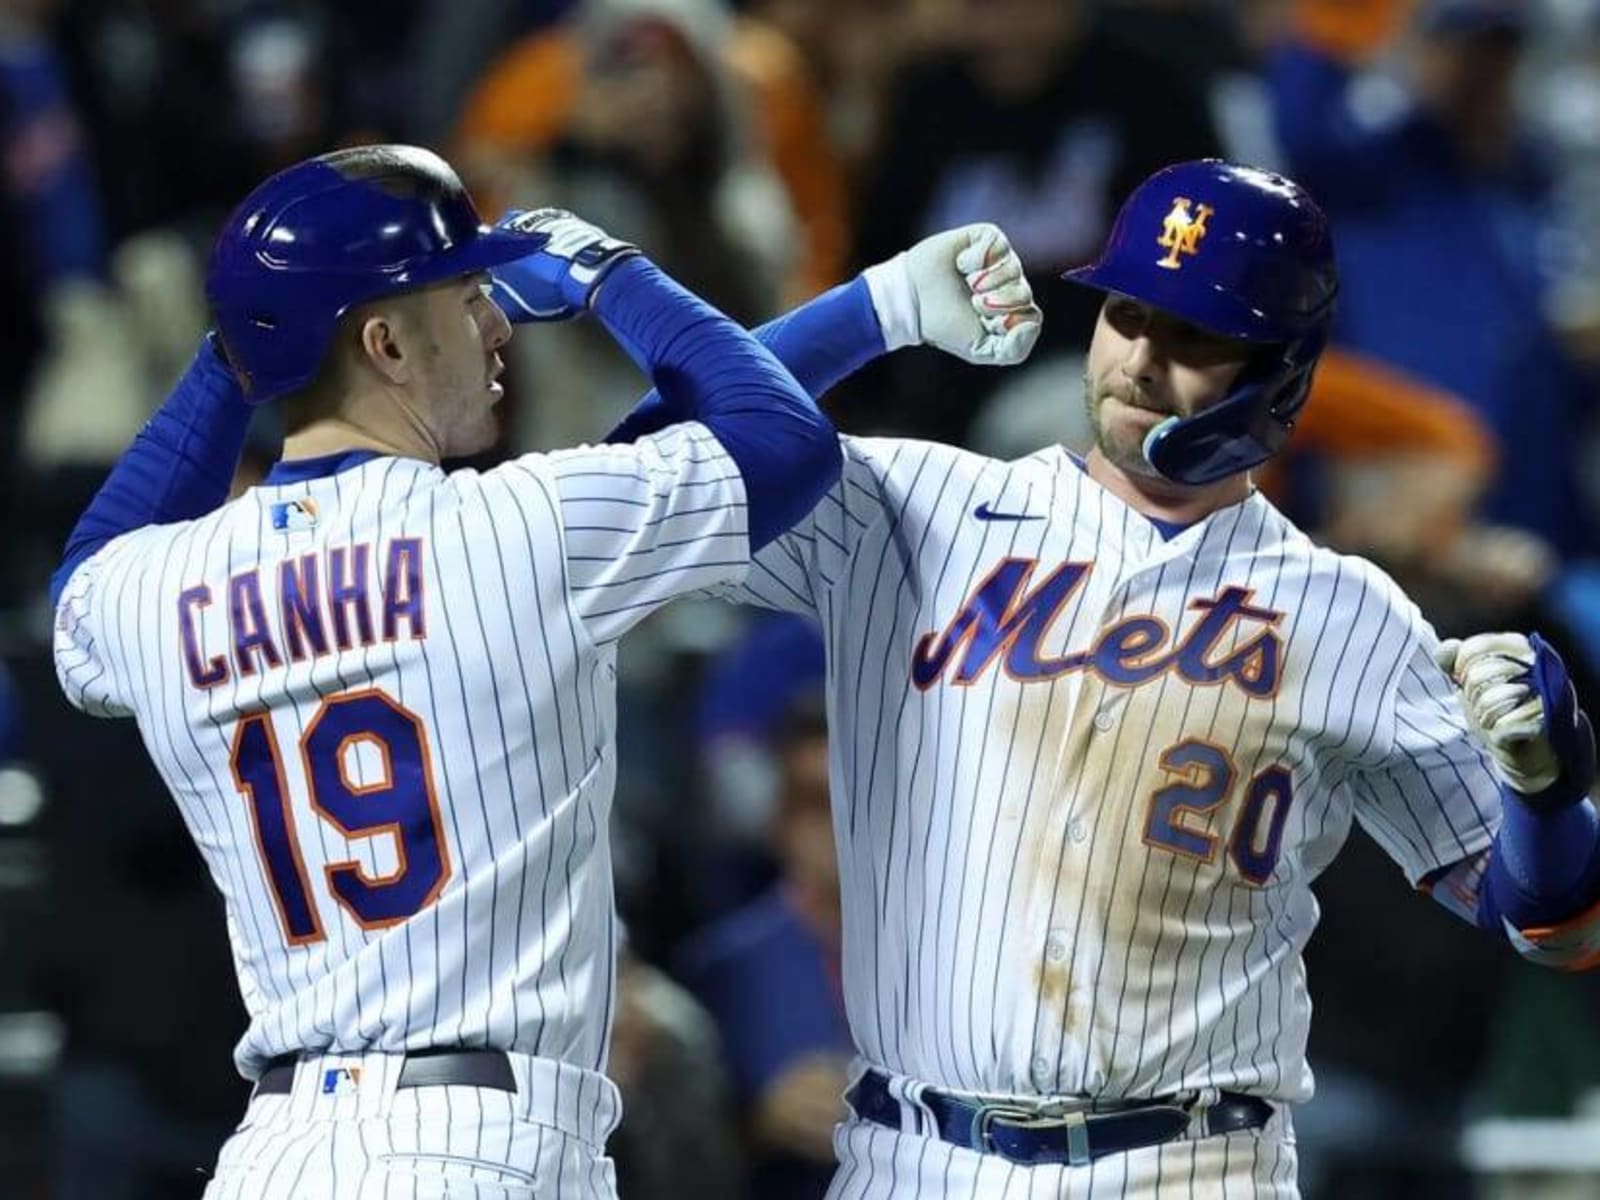 New York Mets 2022: Scouting, Projected Lineup, Season Prediction 